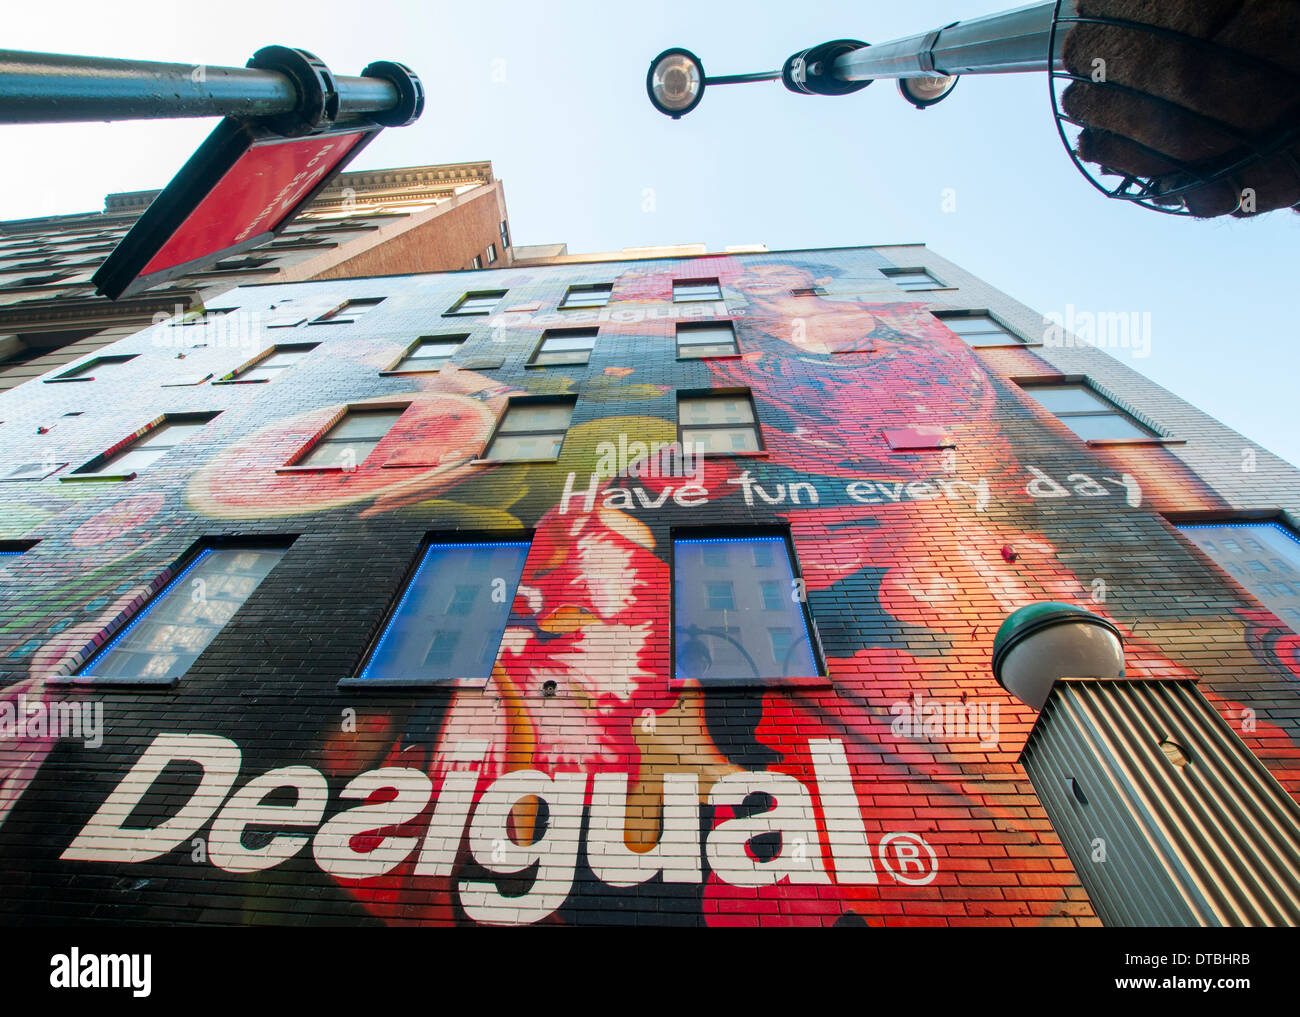 Page 2 - Desigual High Resolution Stock Photography and Images - Alamy